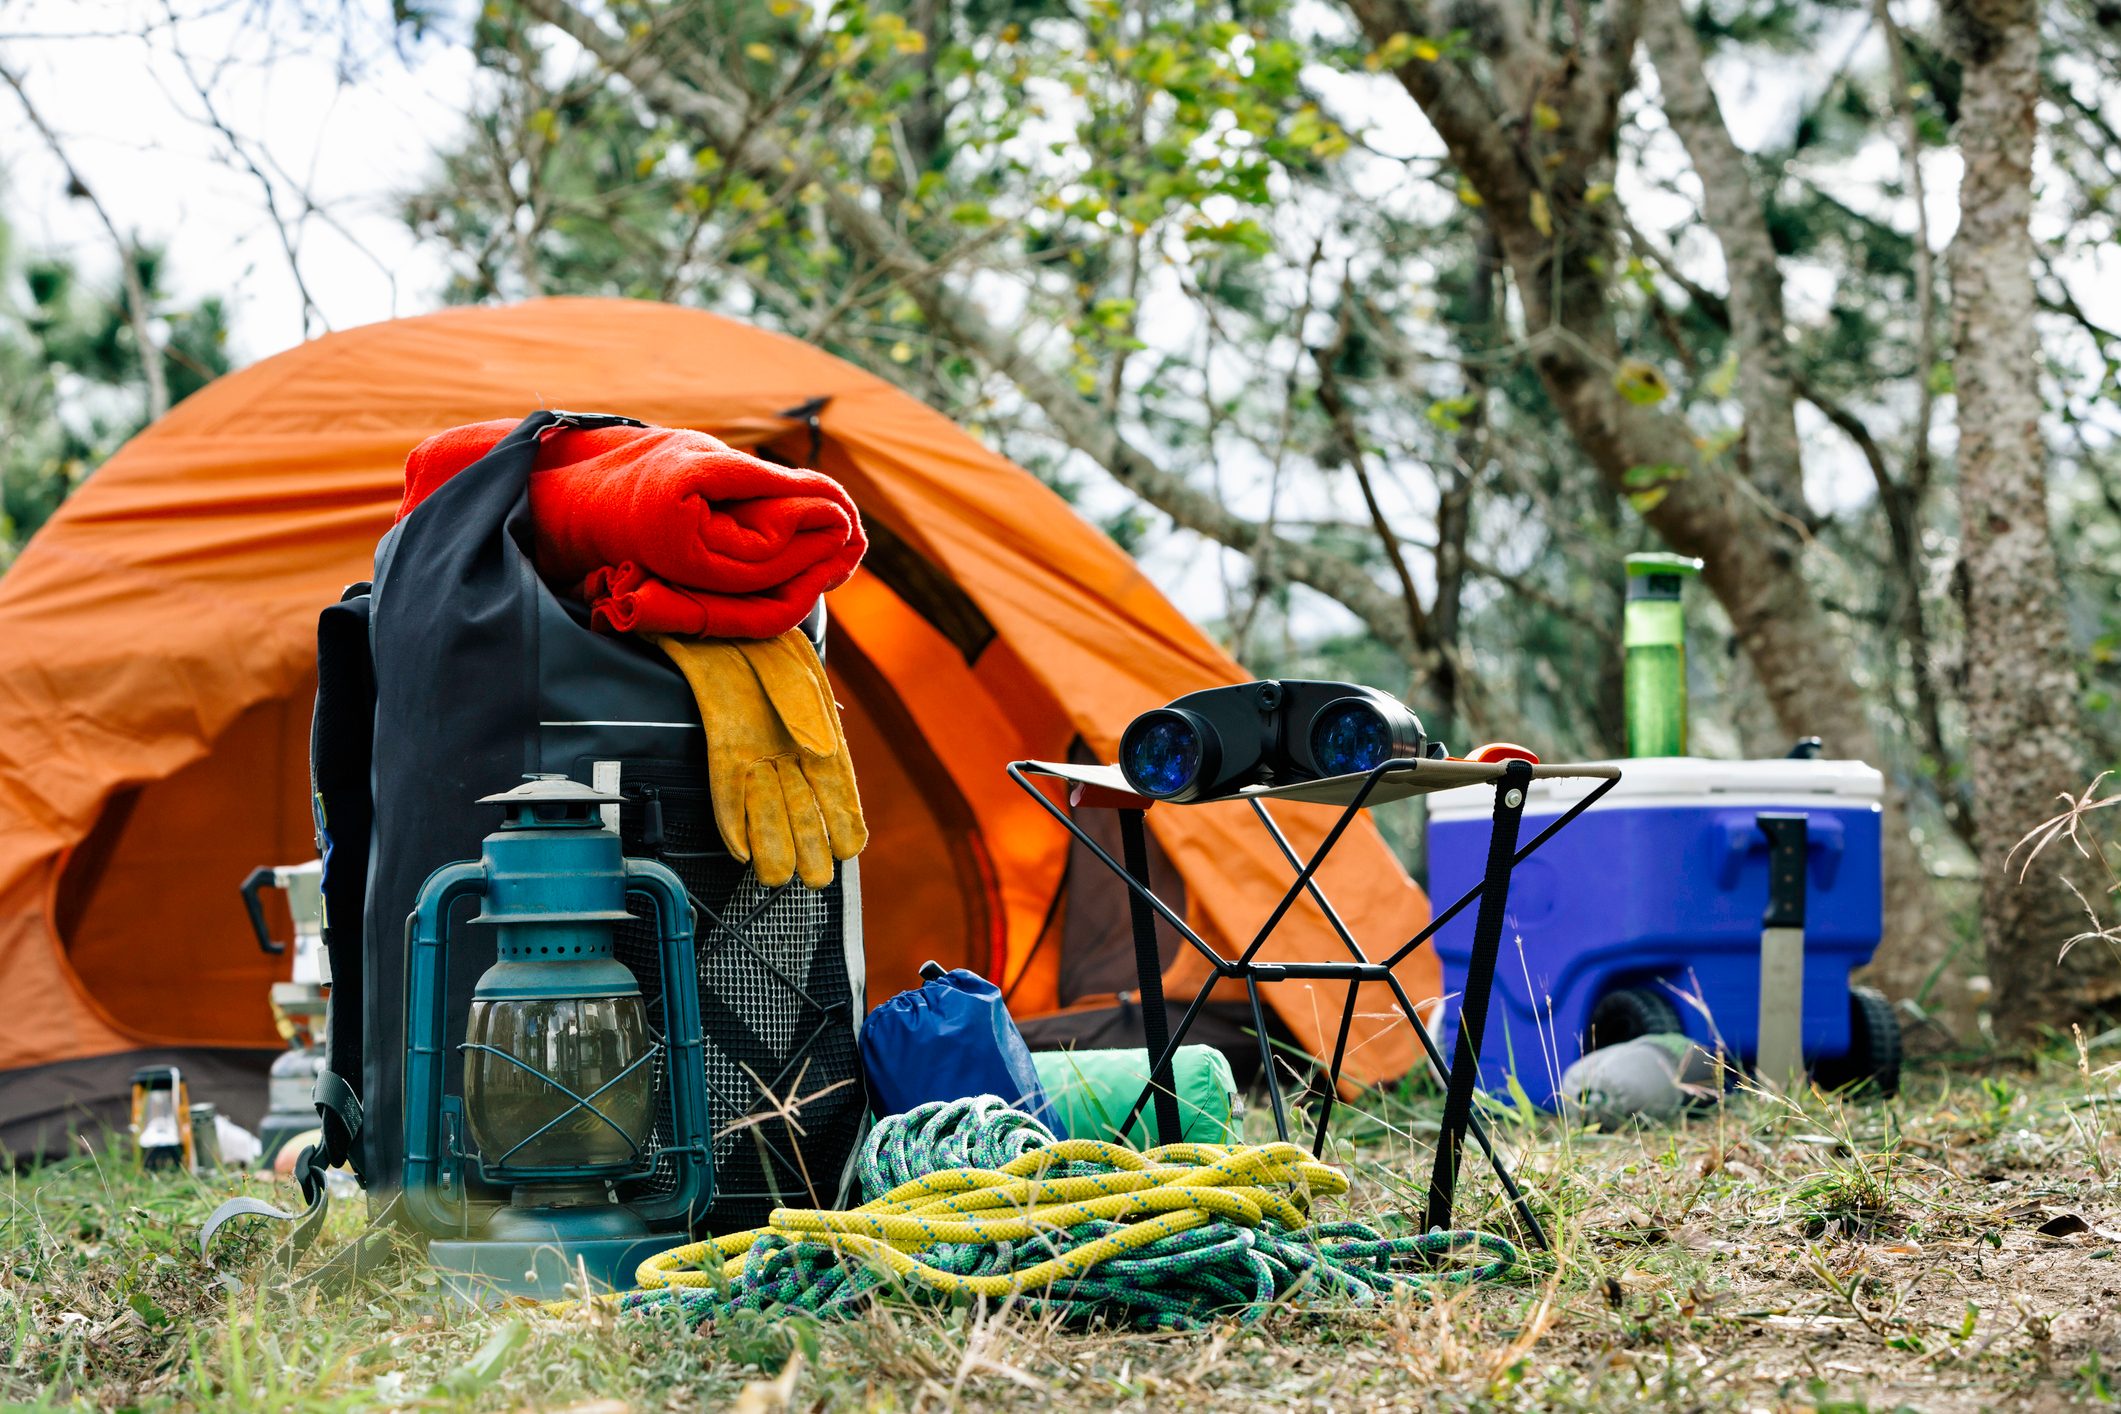 Camping Mistakes Most First-Timers Make | Reader's Digest